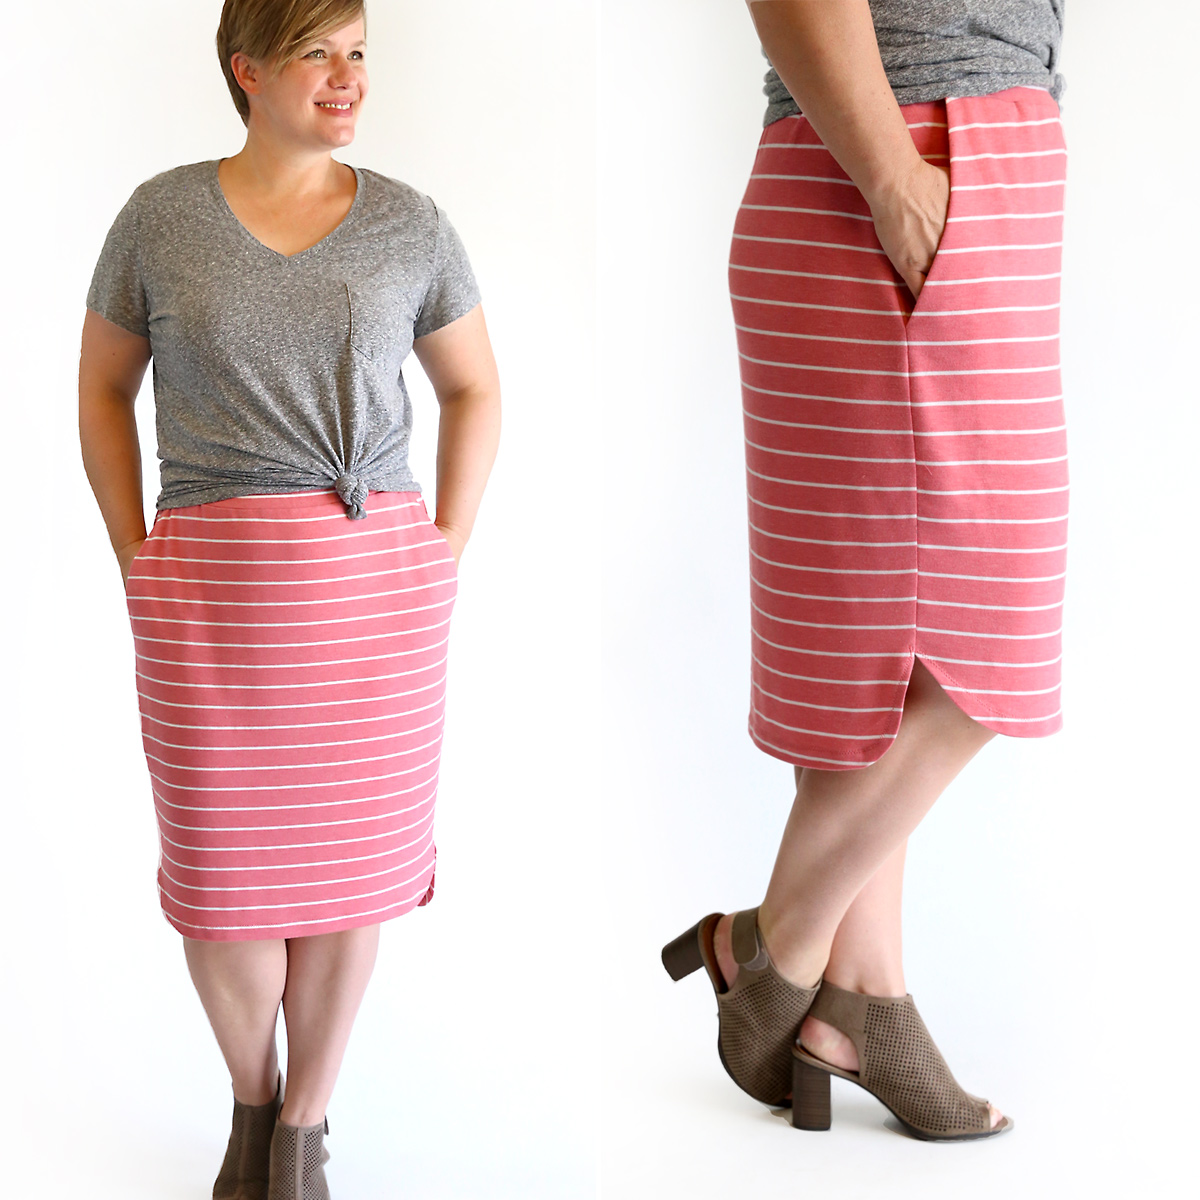 How to make a skirt {the Favorite Skirt sewing pattern} - It’s Always Autumn